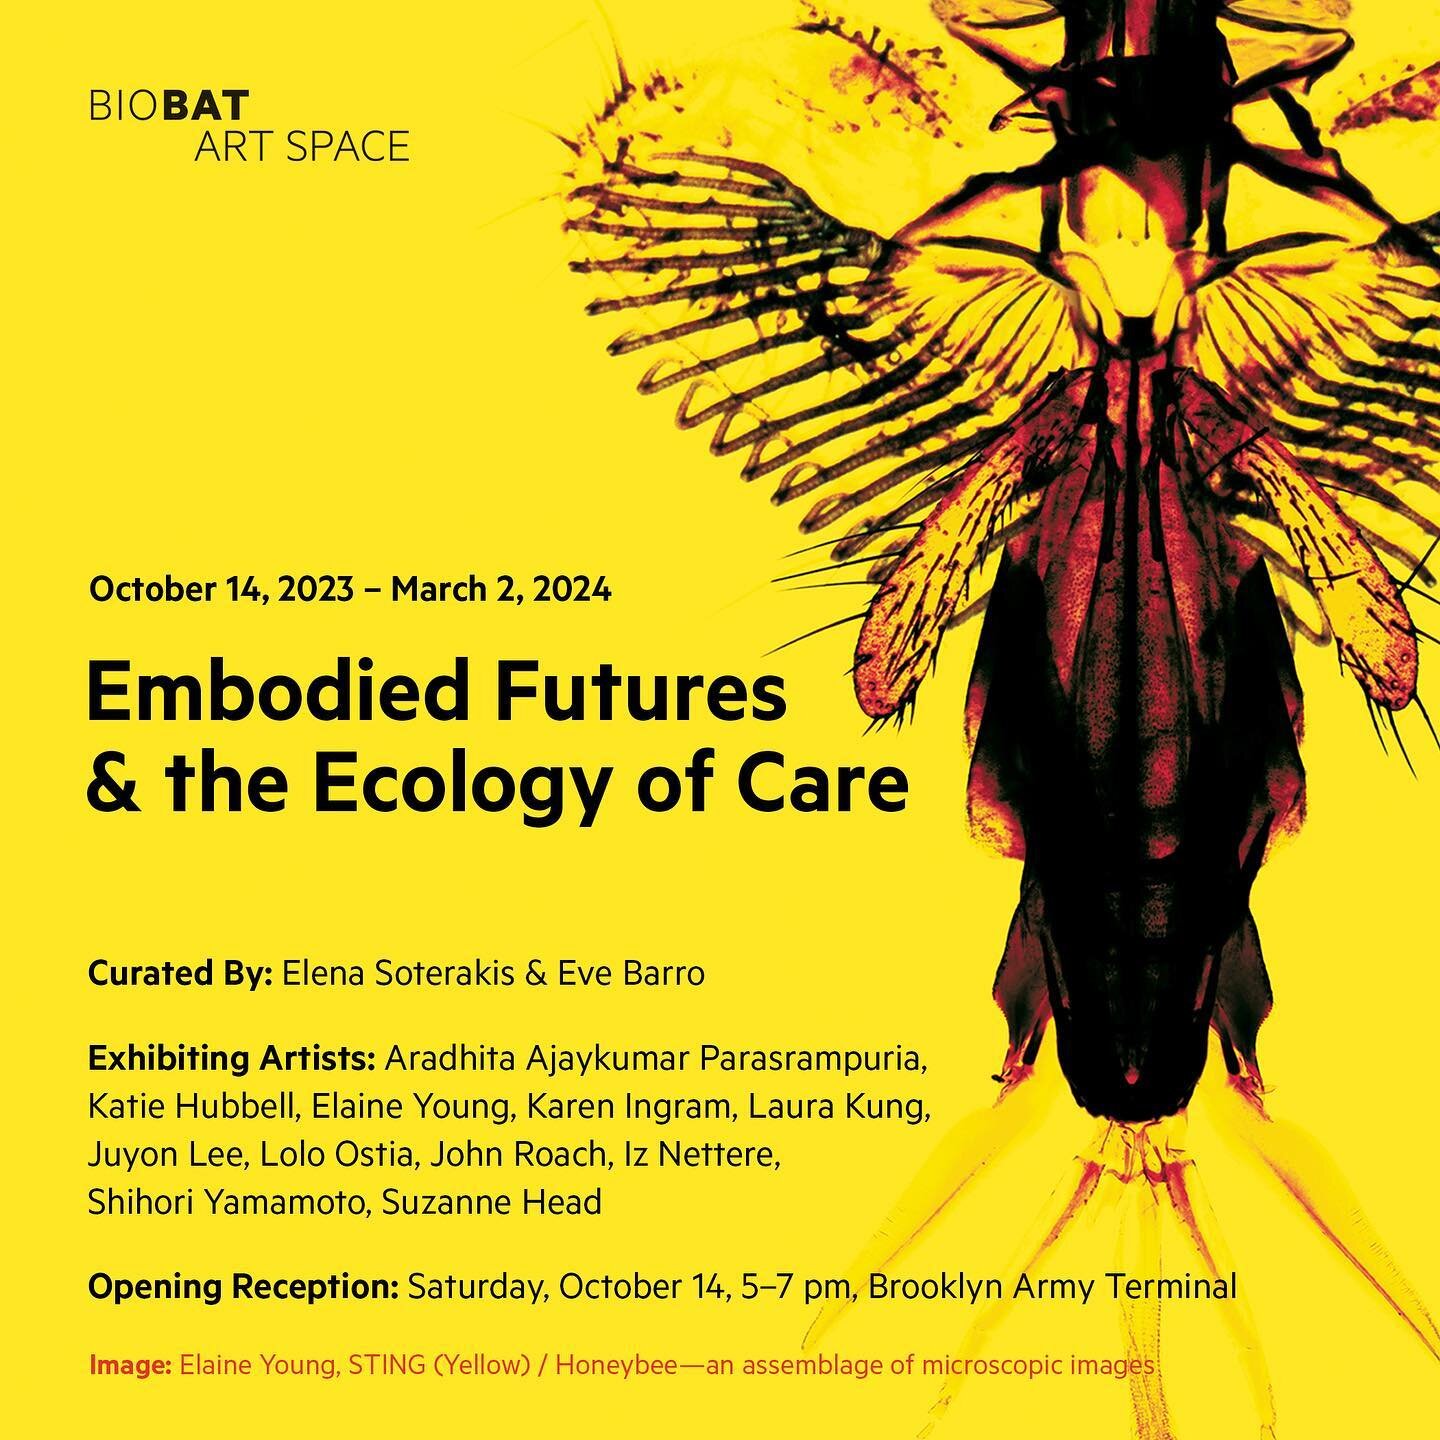 I&rsquo;ve been invited to participate in
&ldquo;Embodied Futures and the Ecology of Care,&rdquo; a bioart show at @biobat_artspace. I&rsquo;ll show my Perri dish flower paintings and process alongside the works of other artists from @narsfoundation 